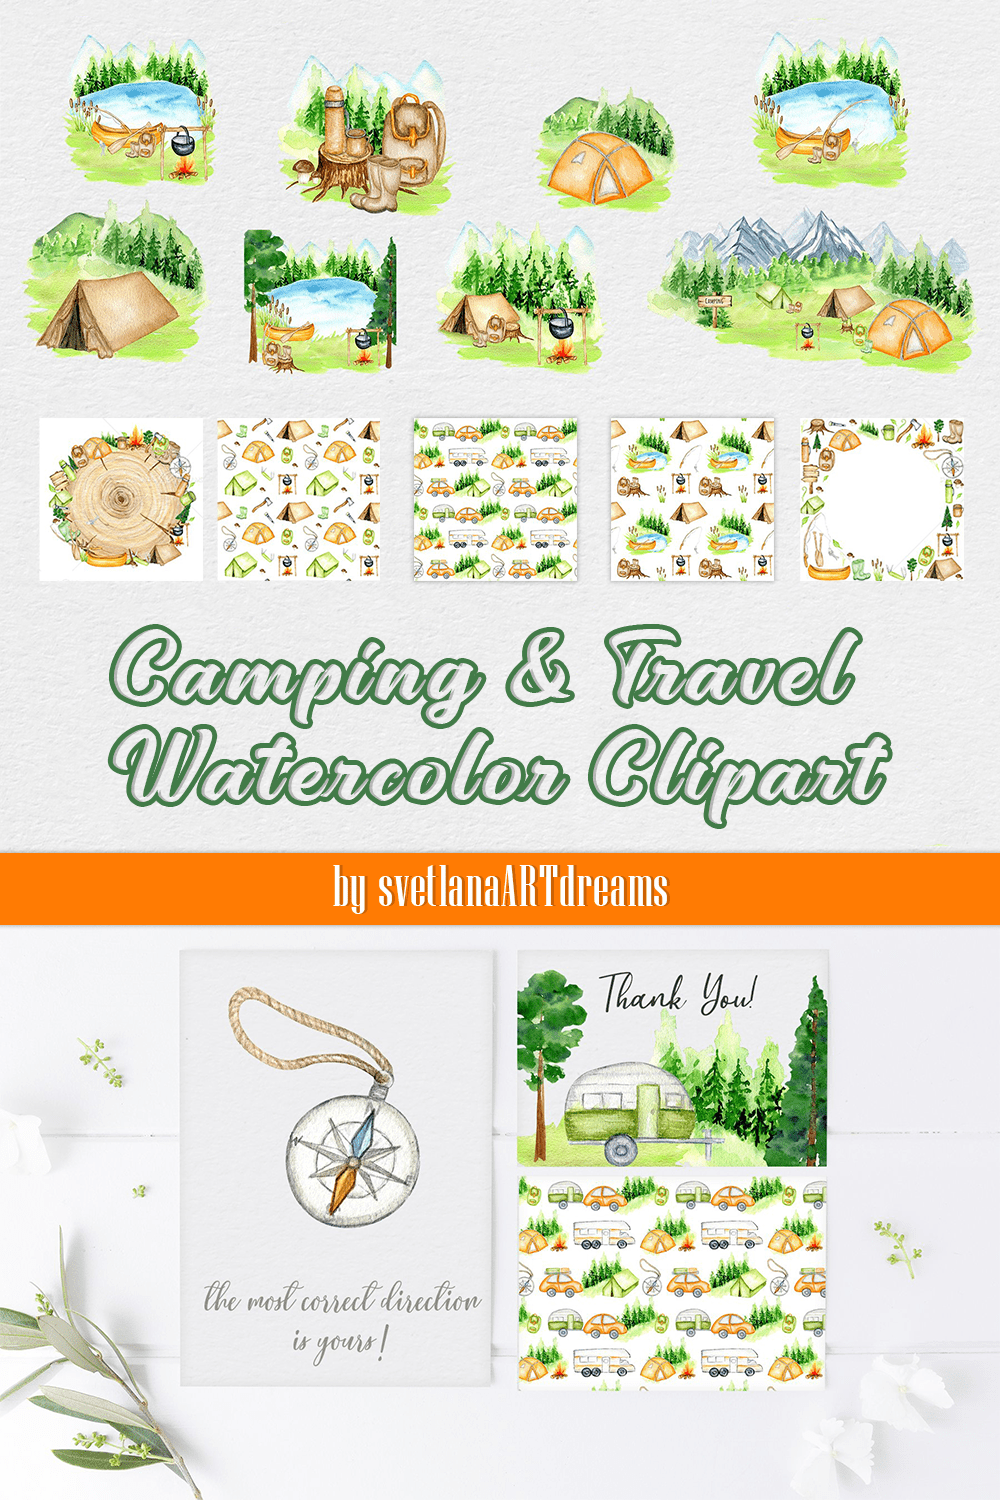 Camping & Travel Watercolor Clipart - pinterest image preview.